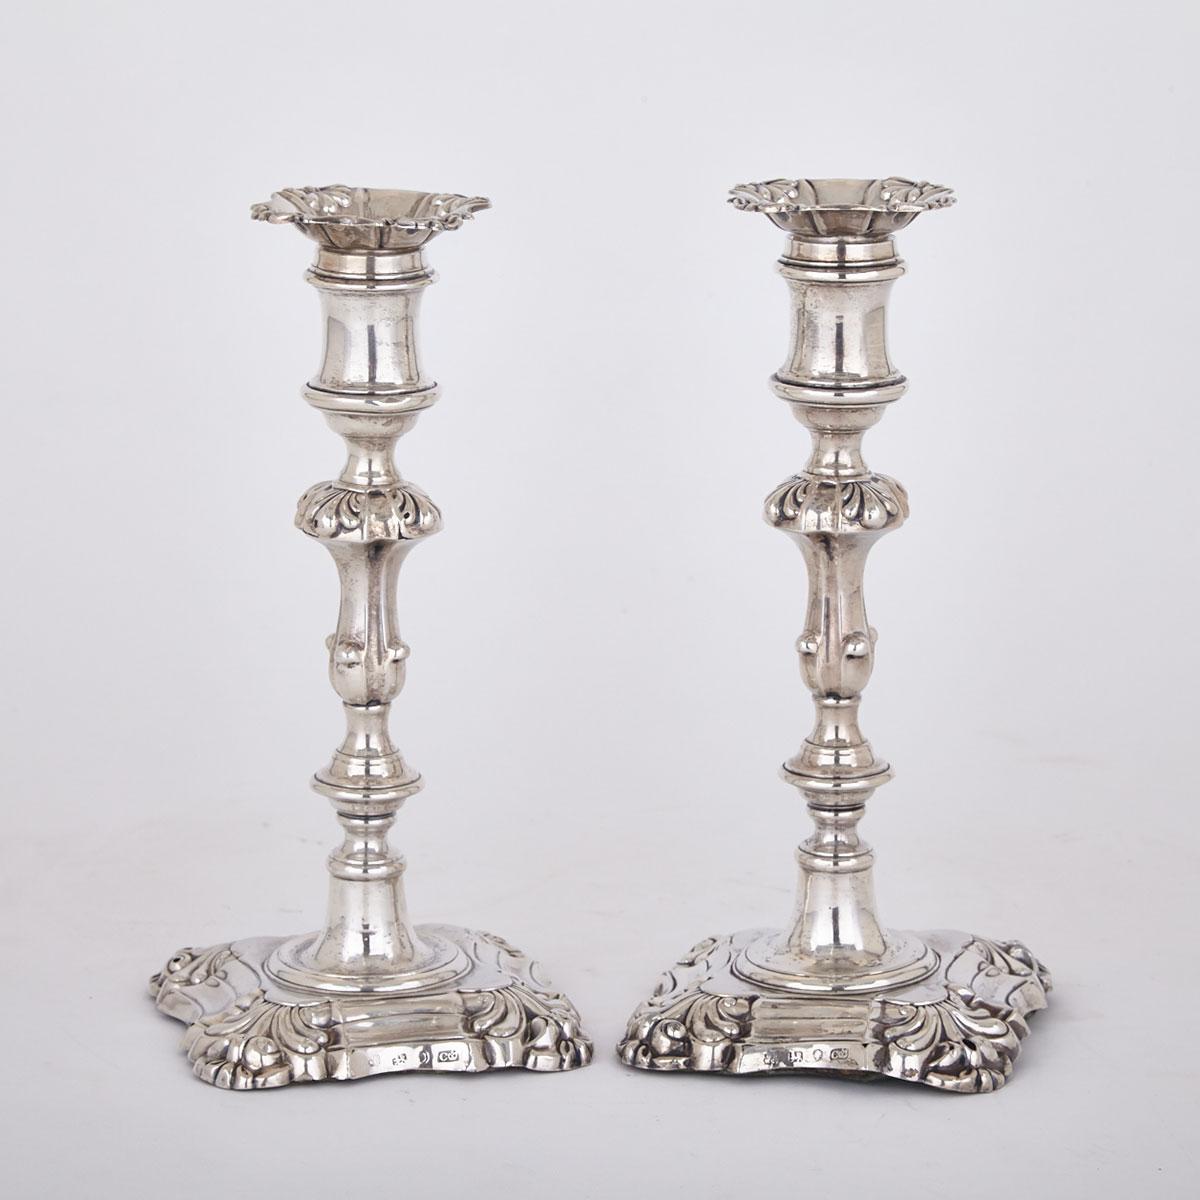 Pair of Victorian Silver Candlesticks, Henry Wilkinson & Co., Sheffield, 1846